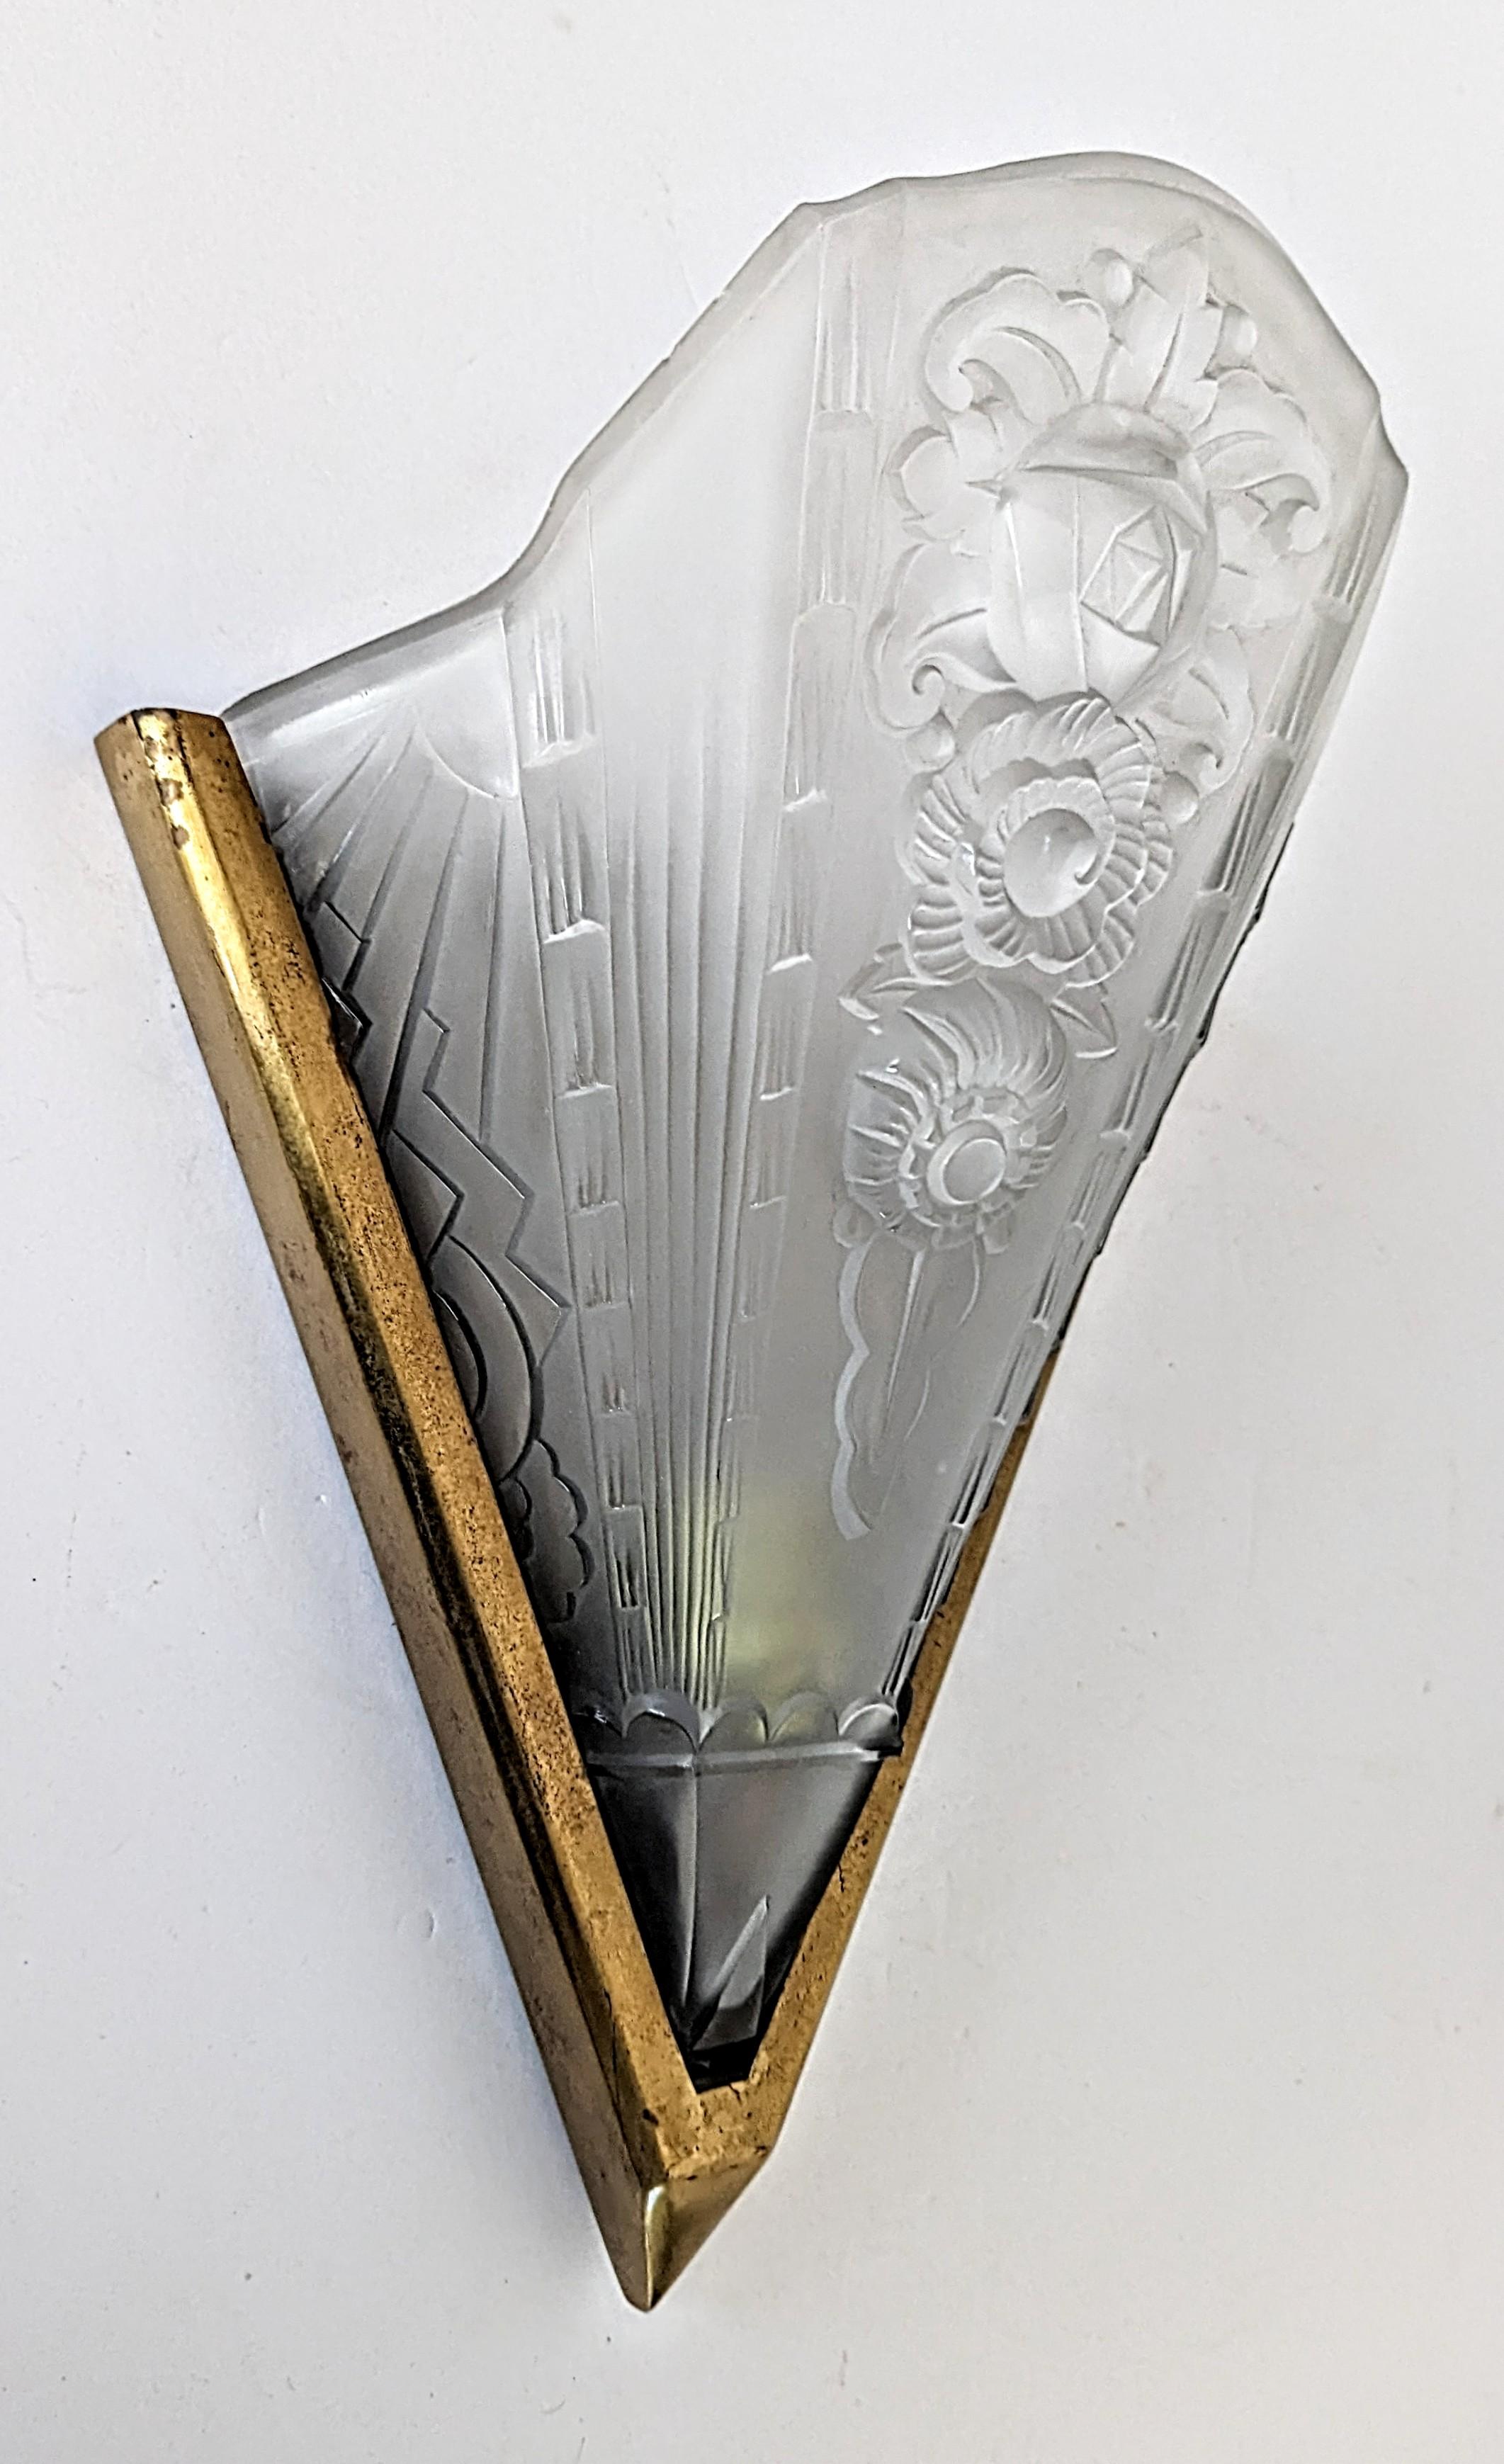 A single French Art Deco wall sconce in good condition. Molded clear frosted glass shade decorated with geometric and floral motifs. Mounted in a golden frame. The sconce has been rewired for U.S. standards. Accommodates a household bulb E-26